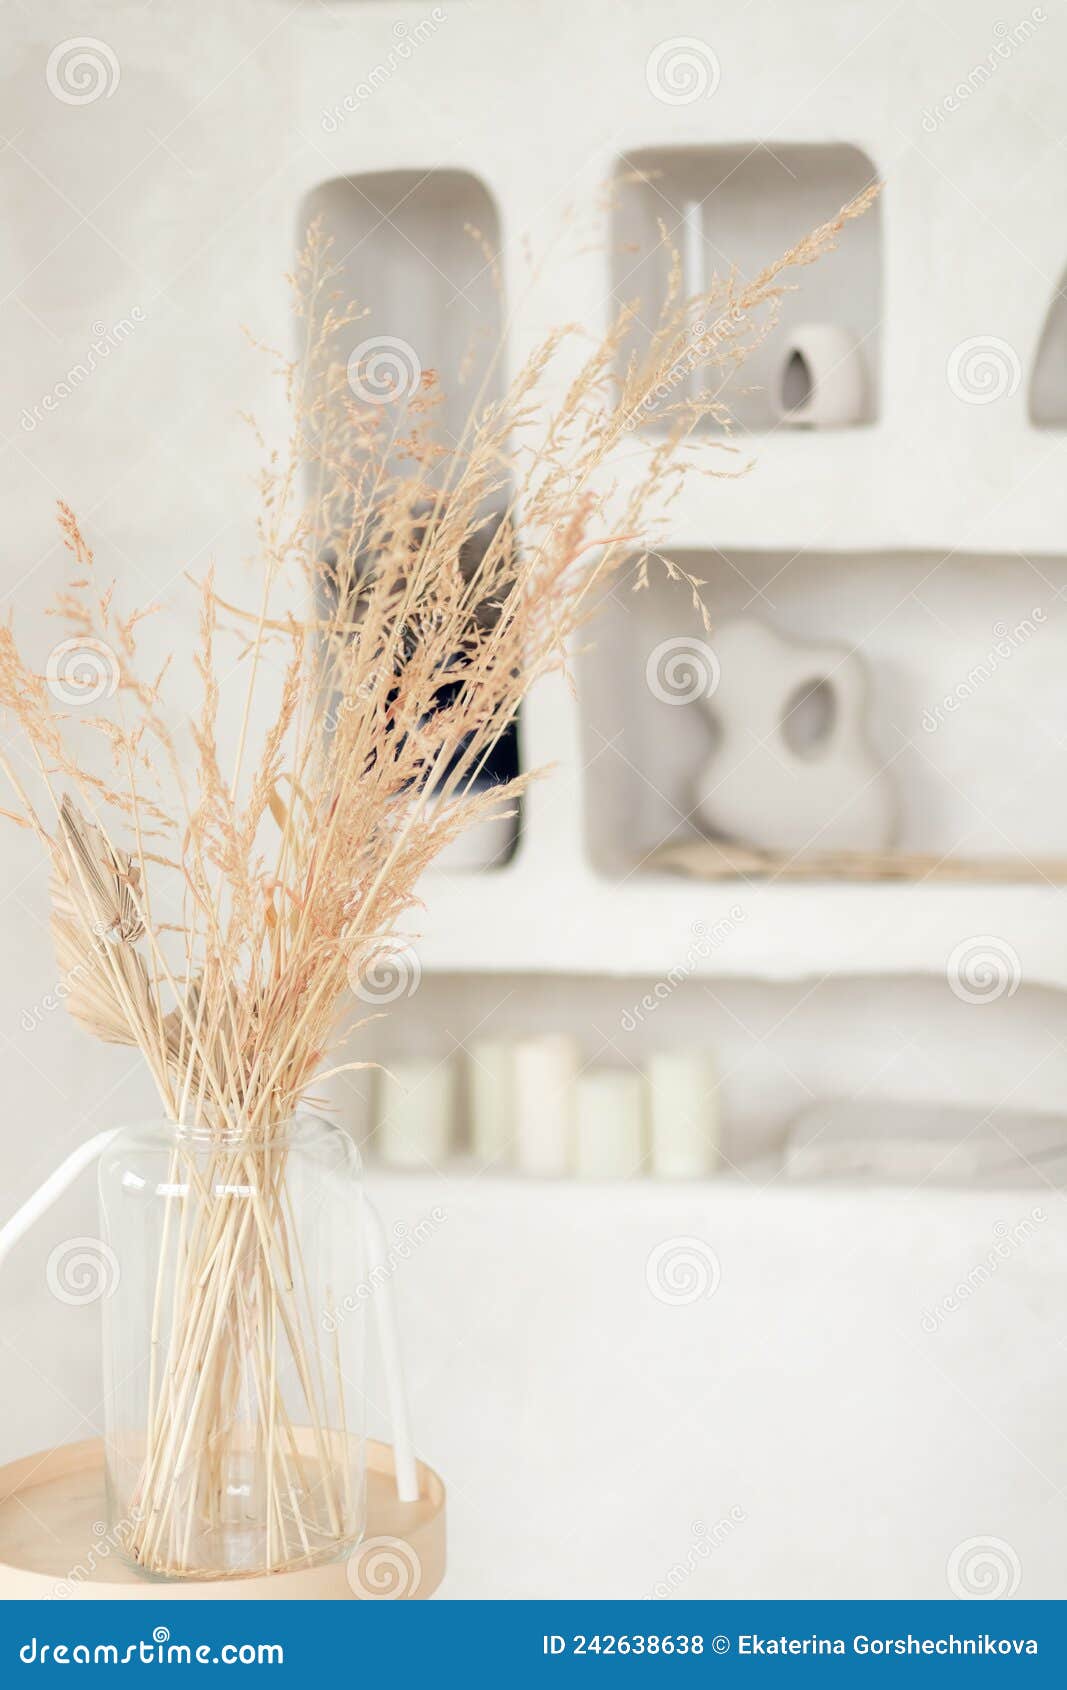 Homemade Still Life with Dry Flowers, Interior Design, Desktop Wallpapers.  Niche in the Wall Stock Photo - Image of indoors, house: 242638638